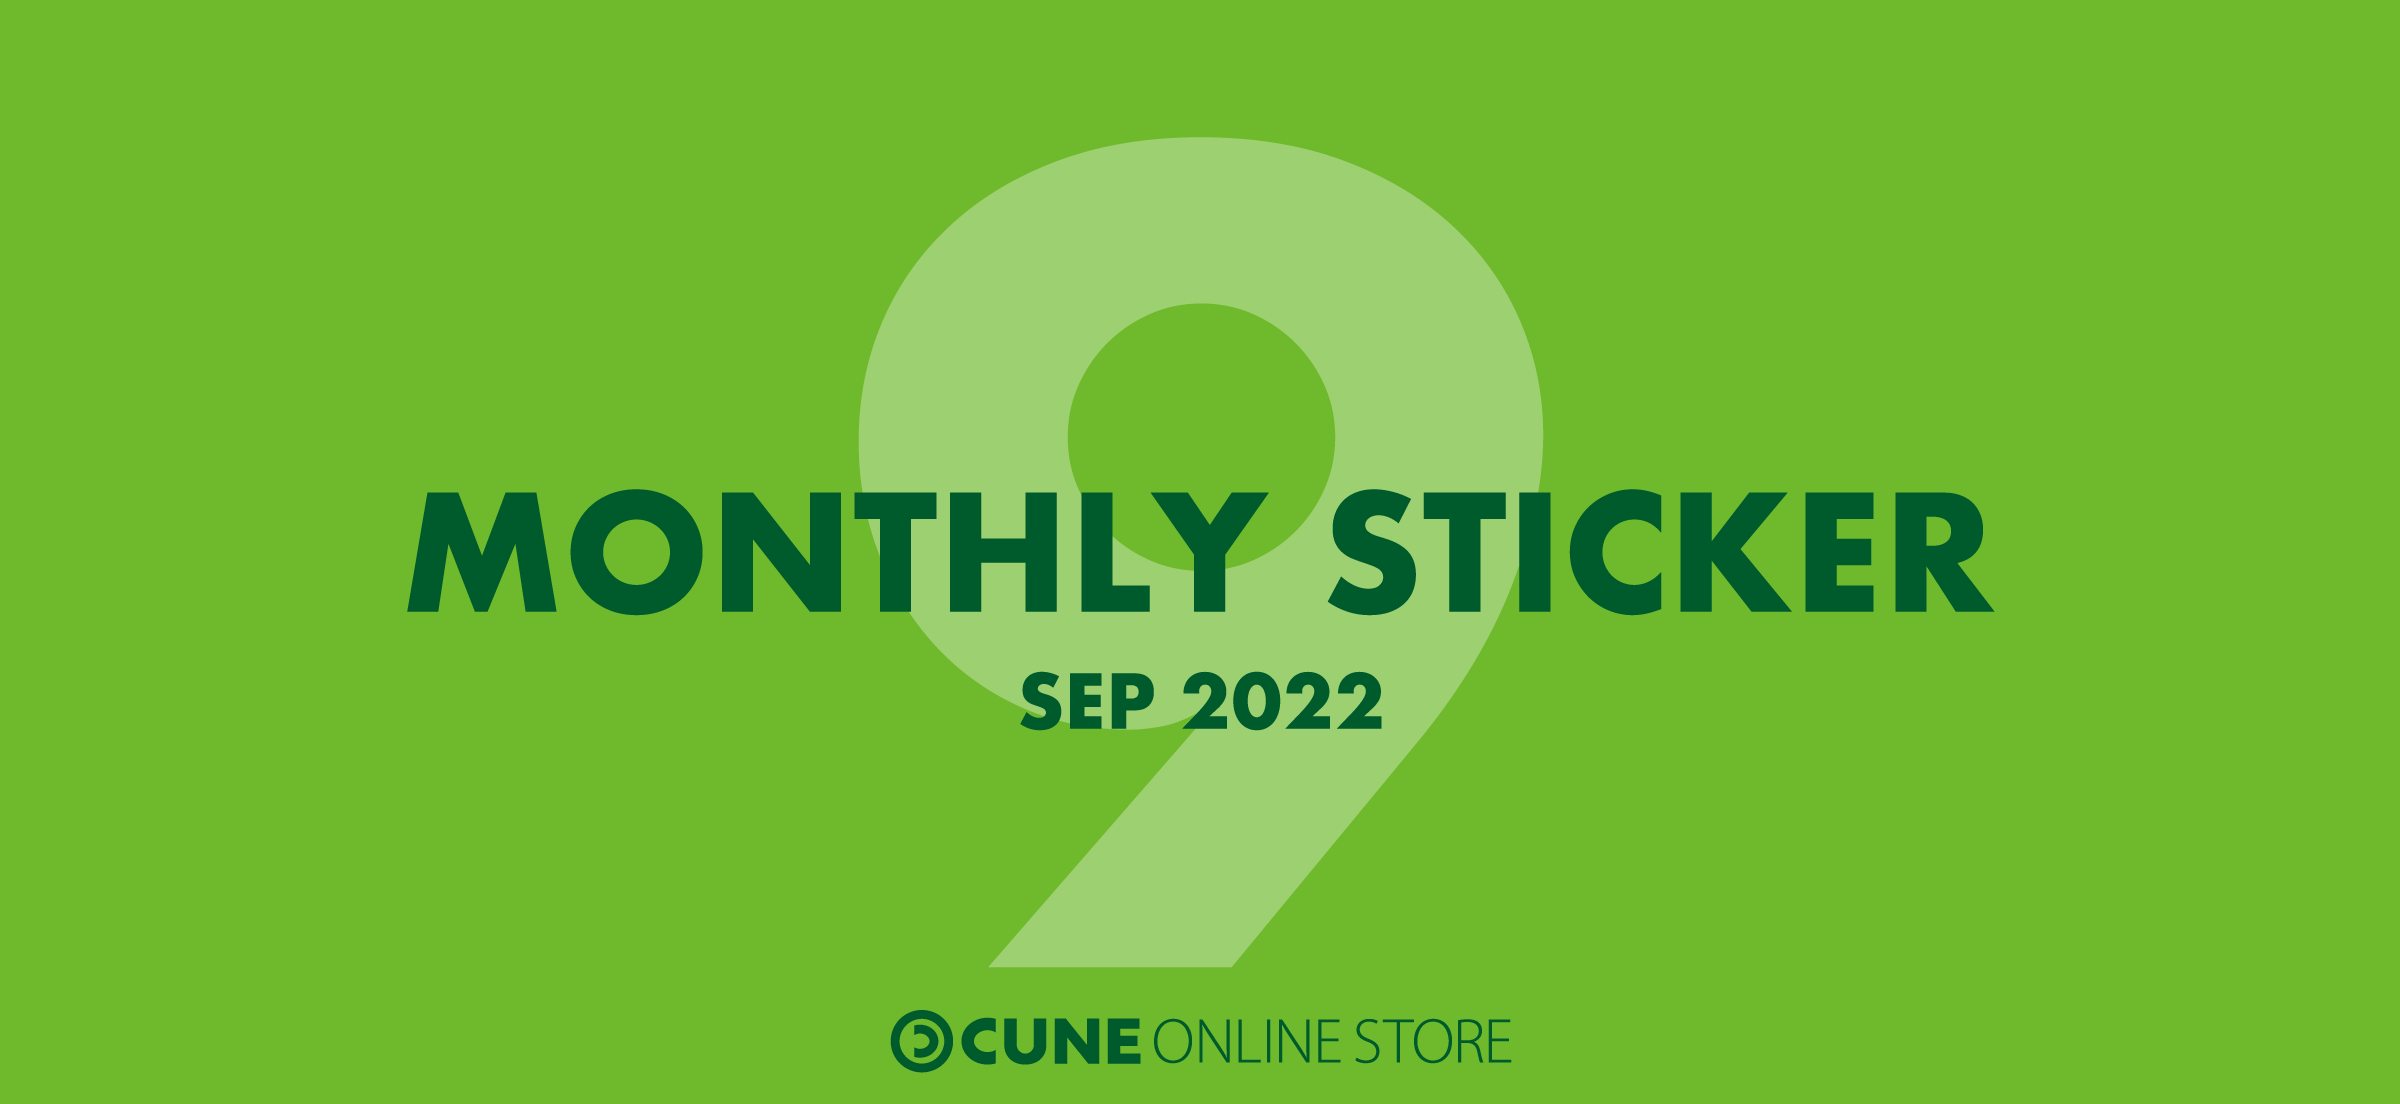 CUNE MONTHLY STICKER AUG 2022